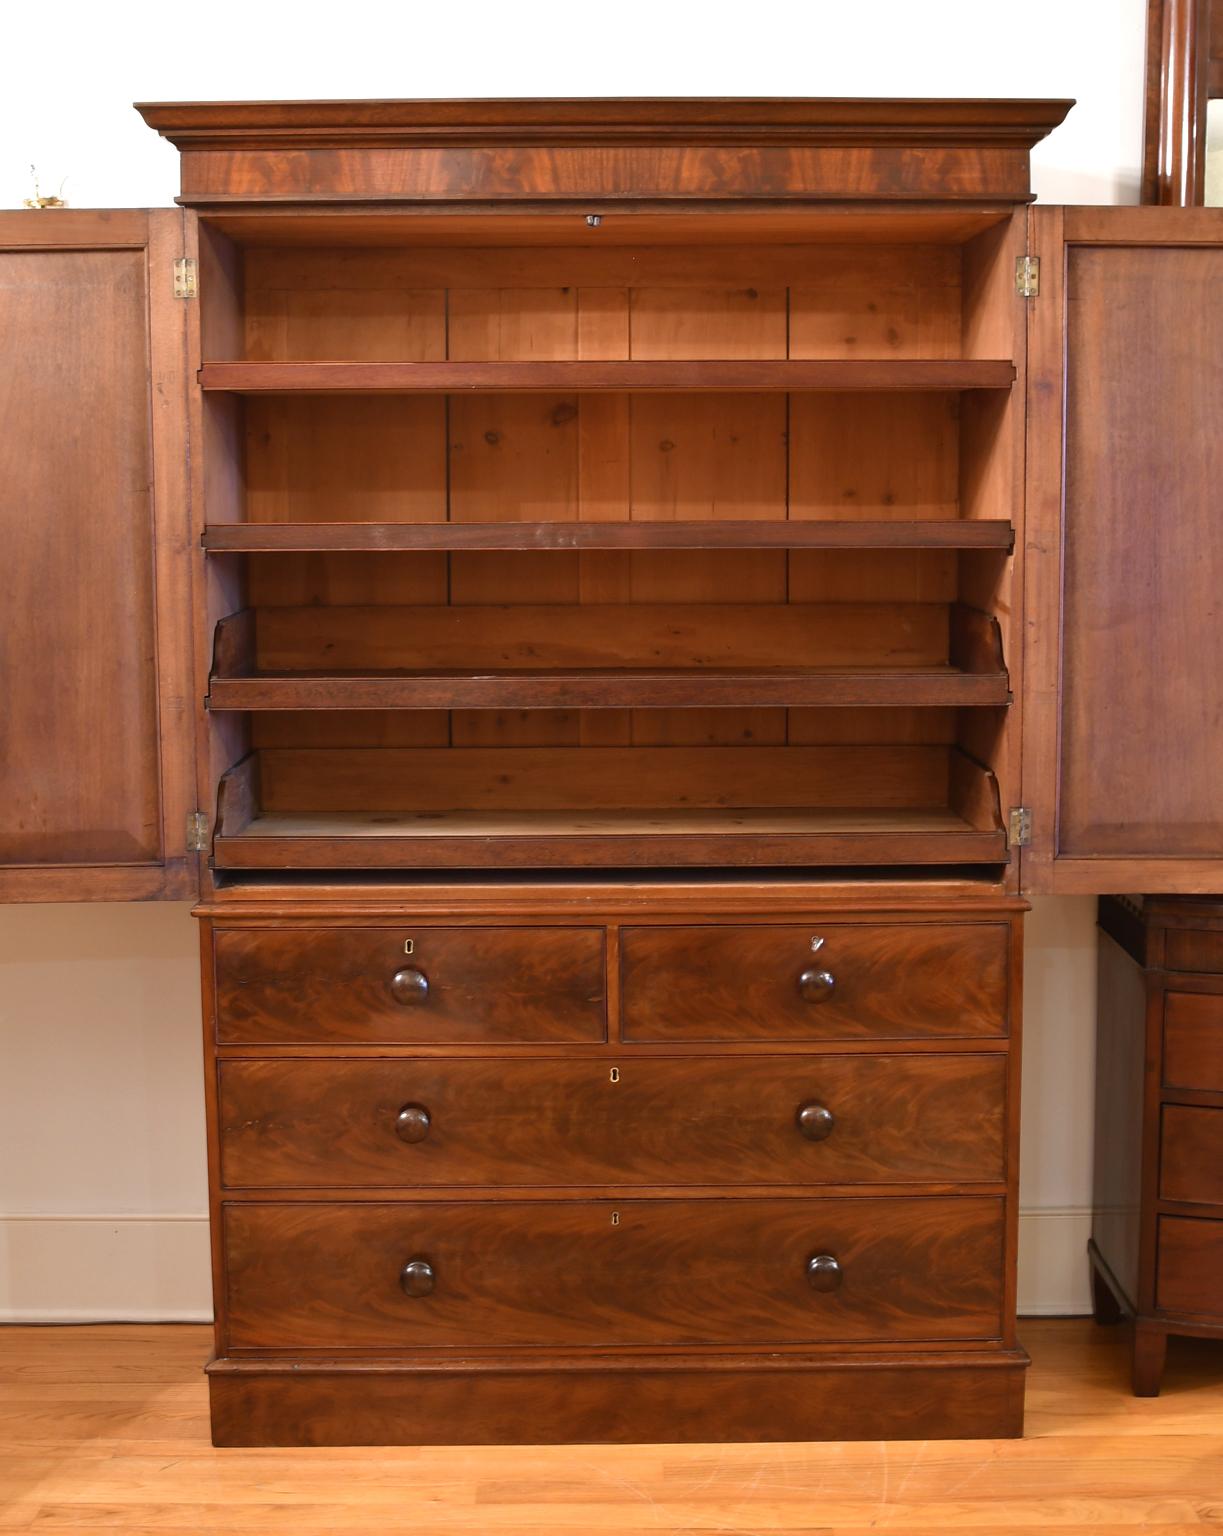 An English Regency linen press in fine West Indies mahogany with two cabinet doors over base containing two drawers over two longer storage drawers. Interior offers 2 sliding shelves & 2 sliding trays. Features a handsome figuring of the wood grain